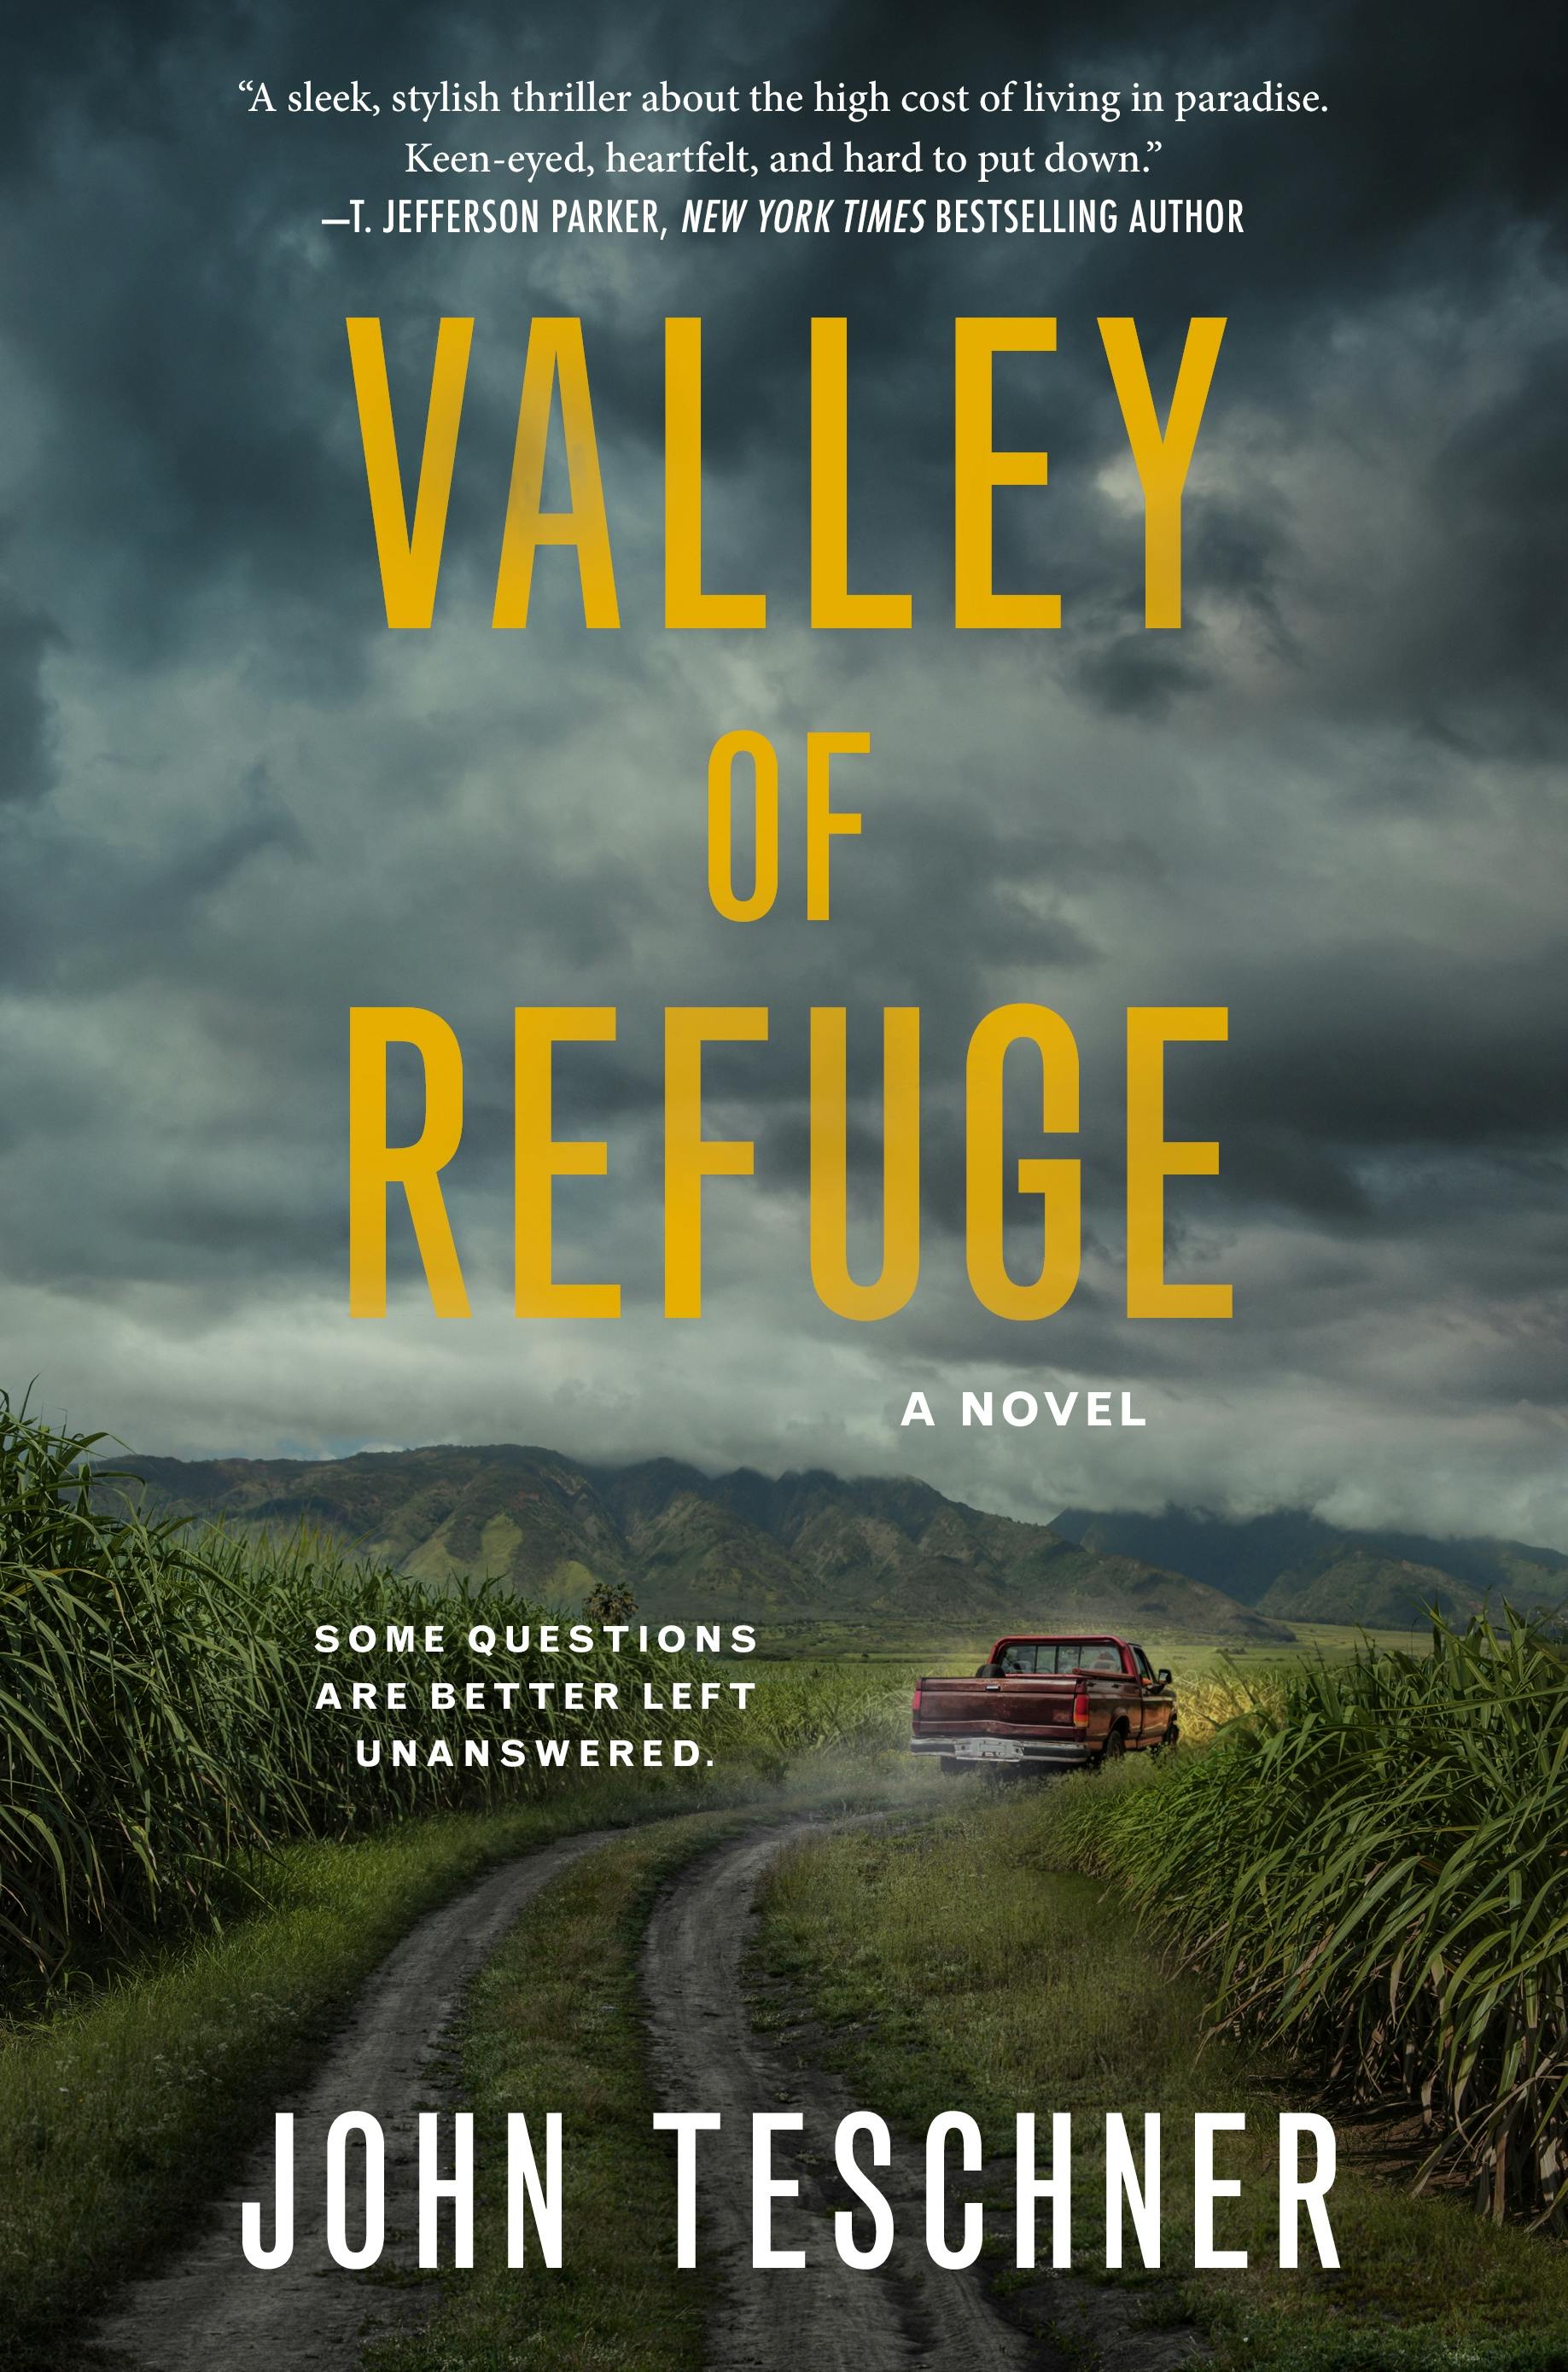 Cover for the book titled as: Valley of Refuge